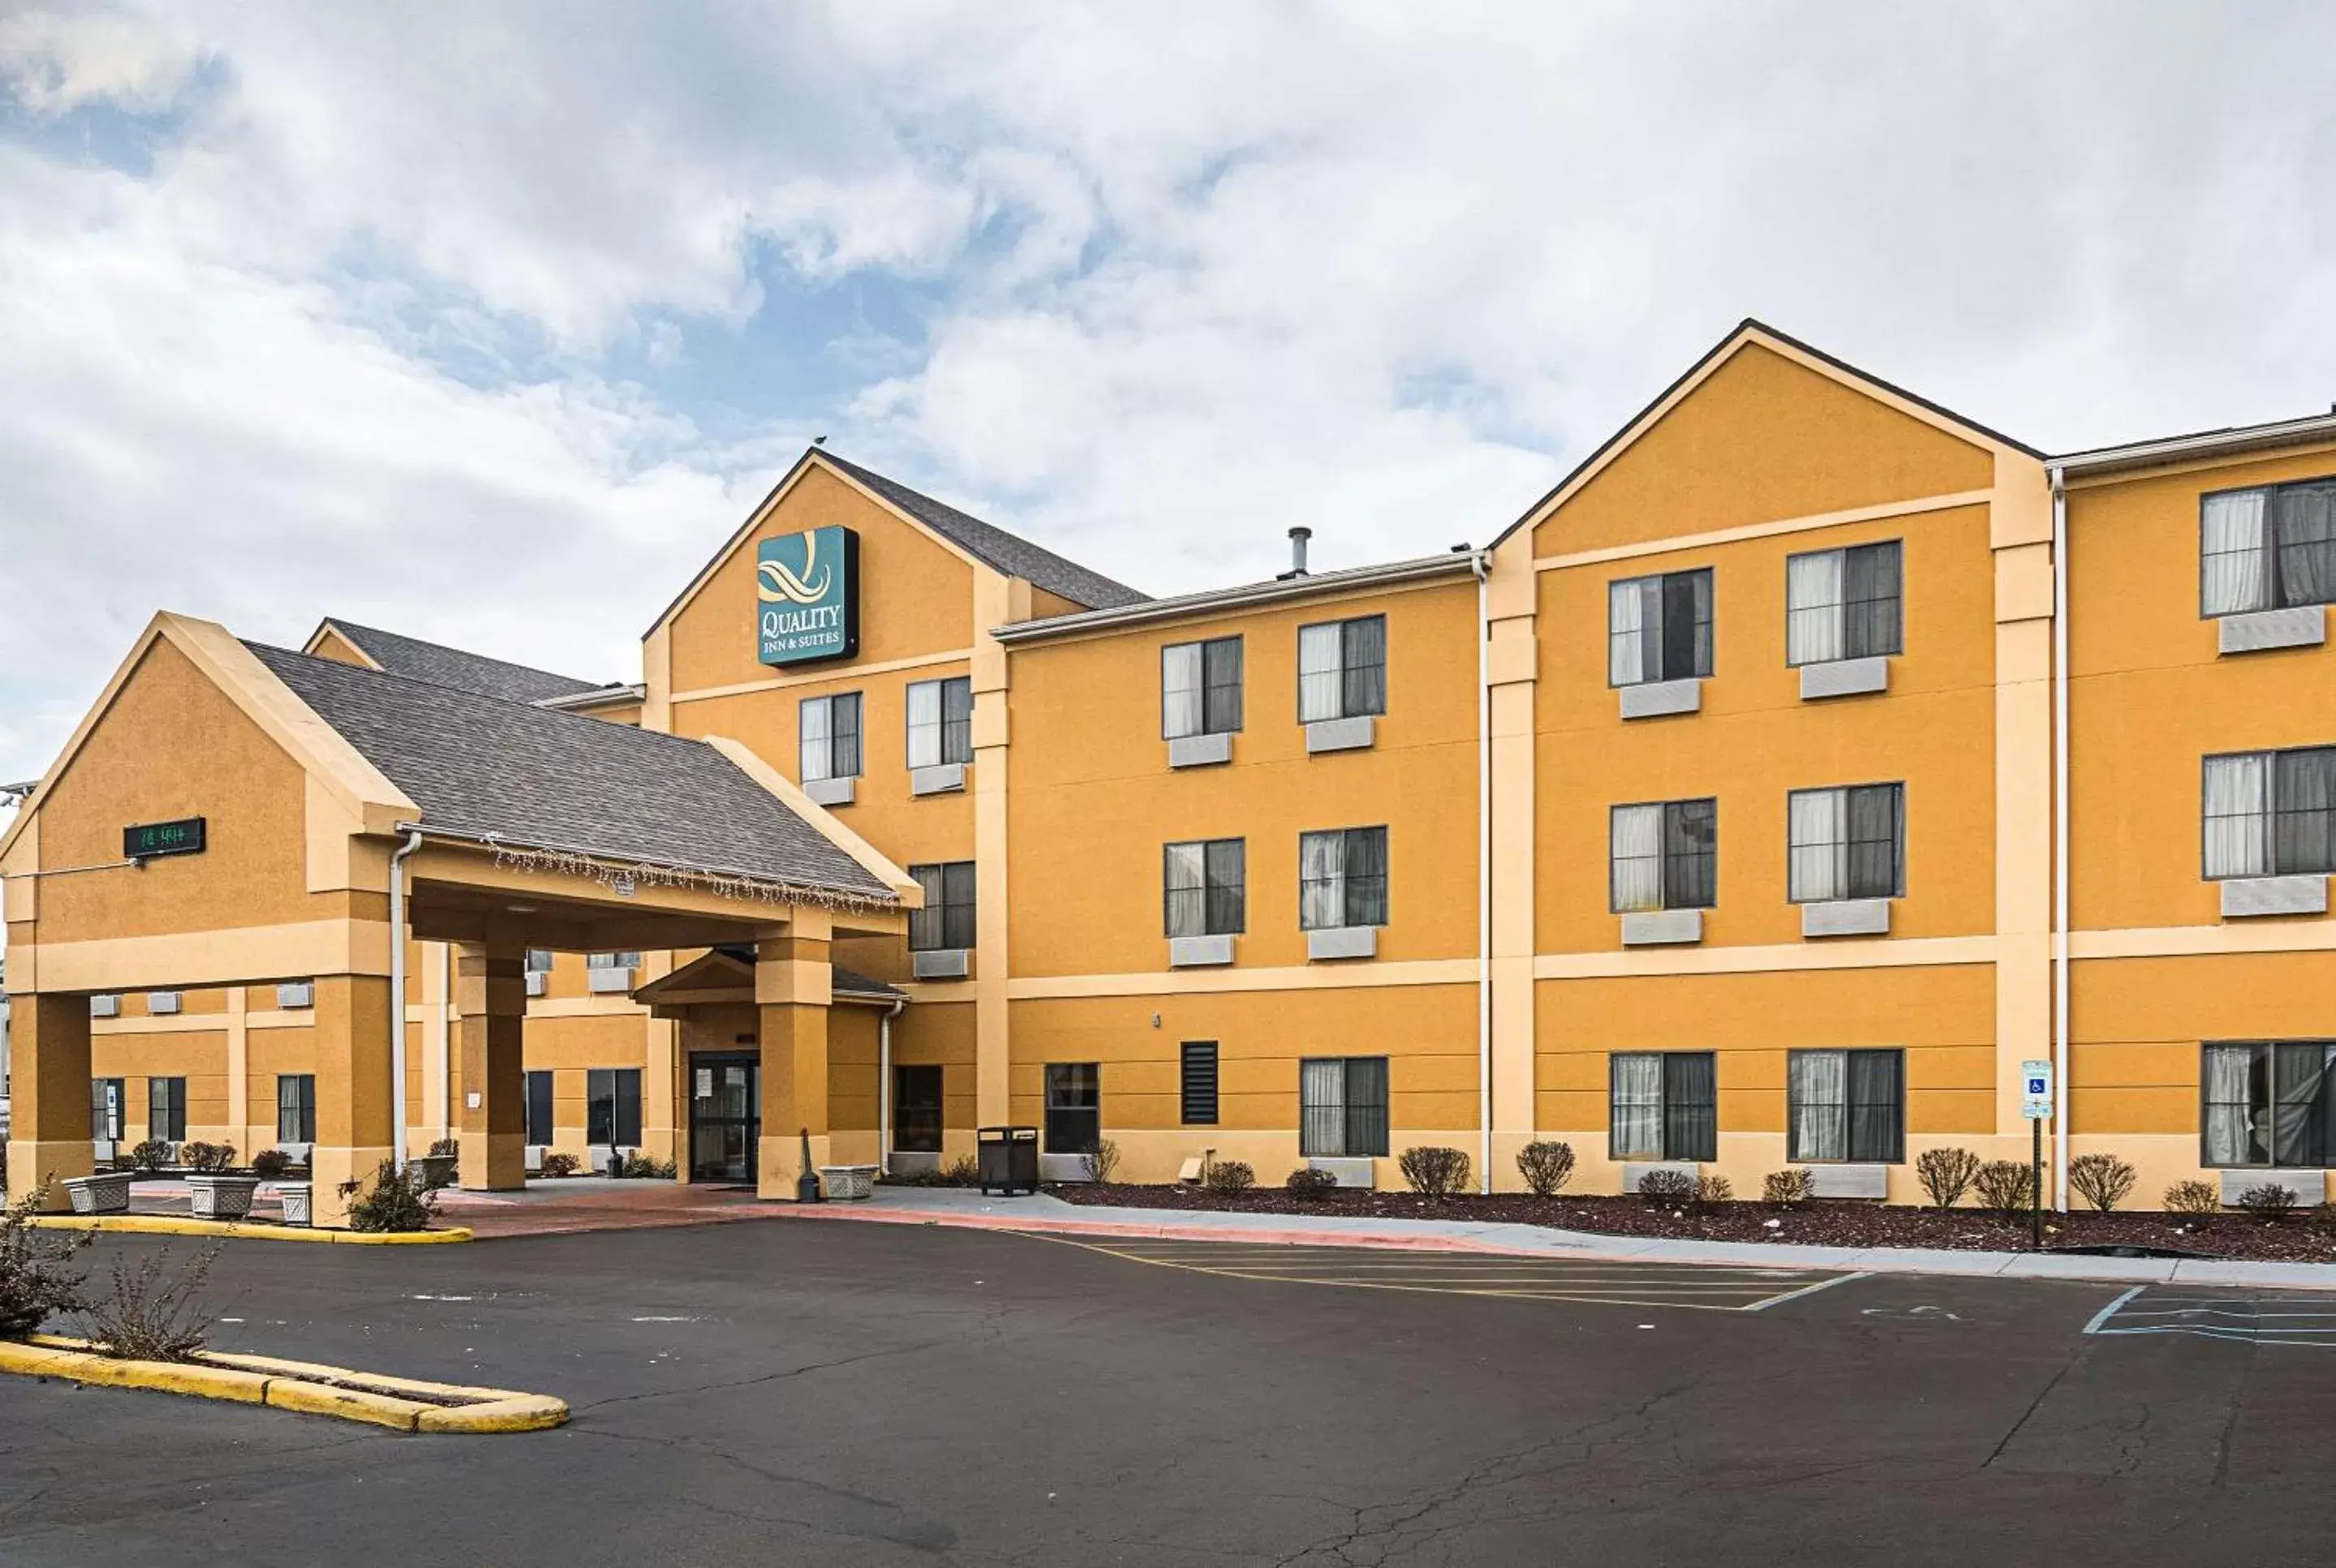 Property Building in Quality Inn and Suites Harvey